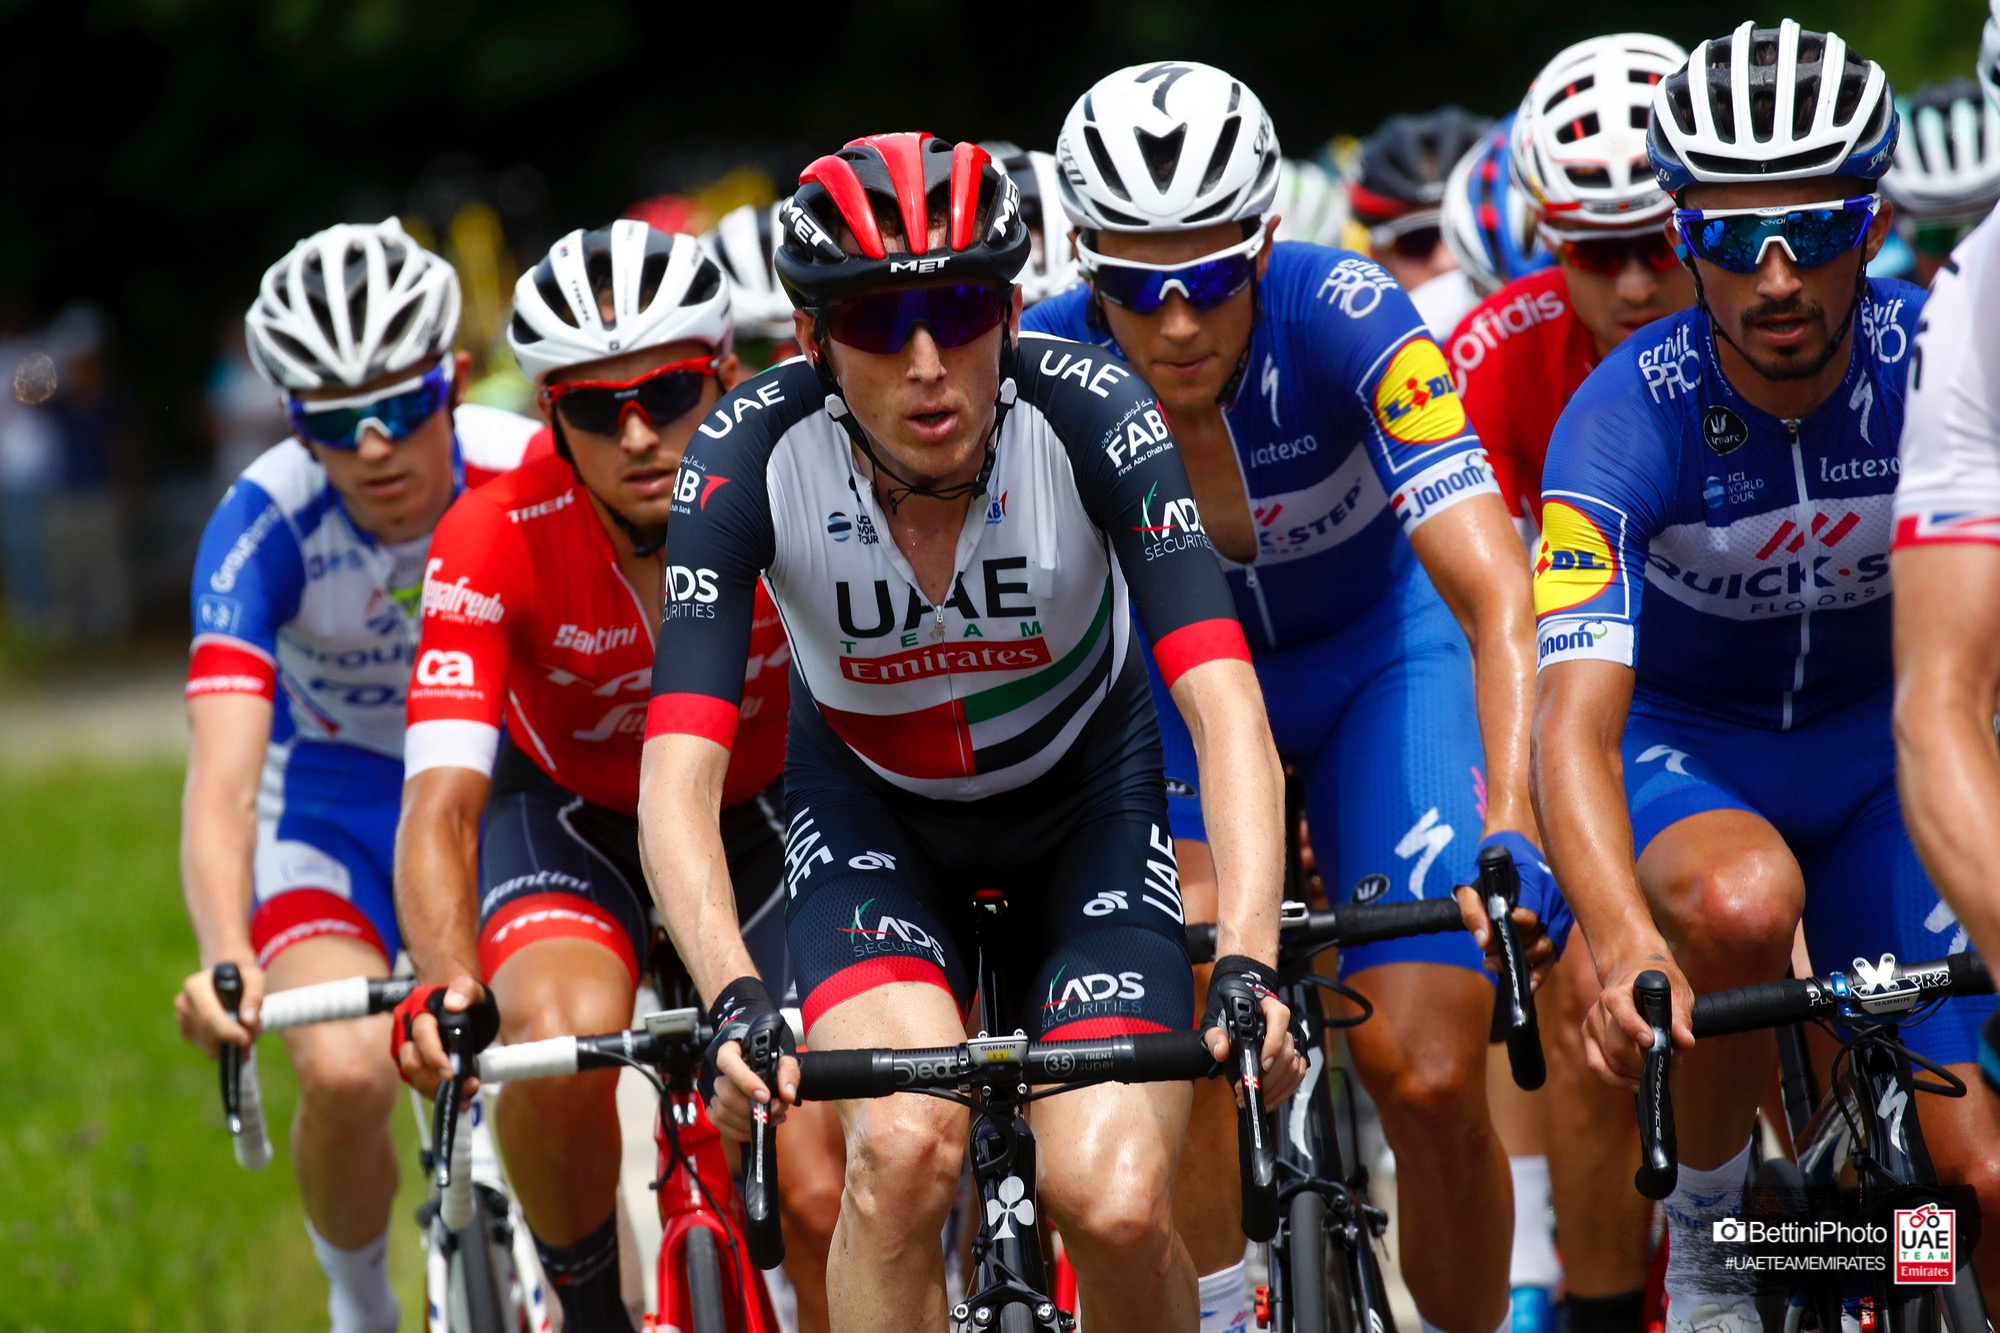 Dan Martin nearly takes a Dauphiné stage win - UAE team Emirates